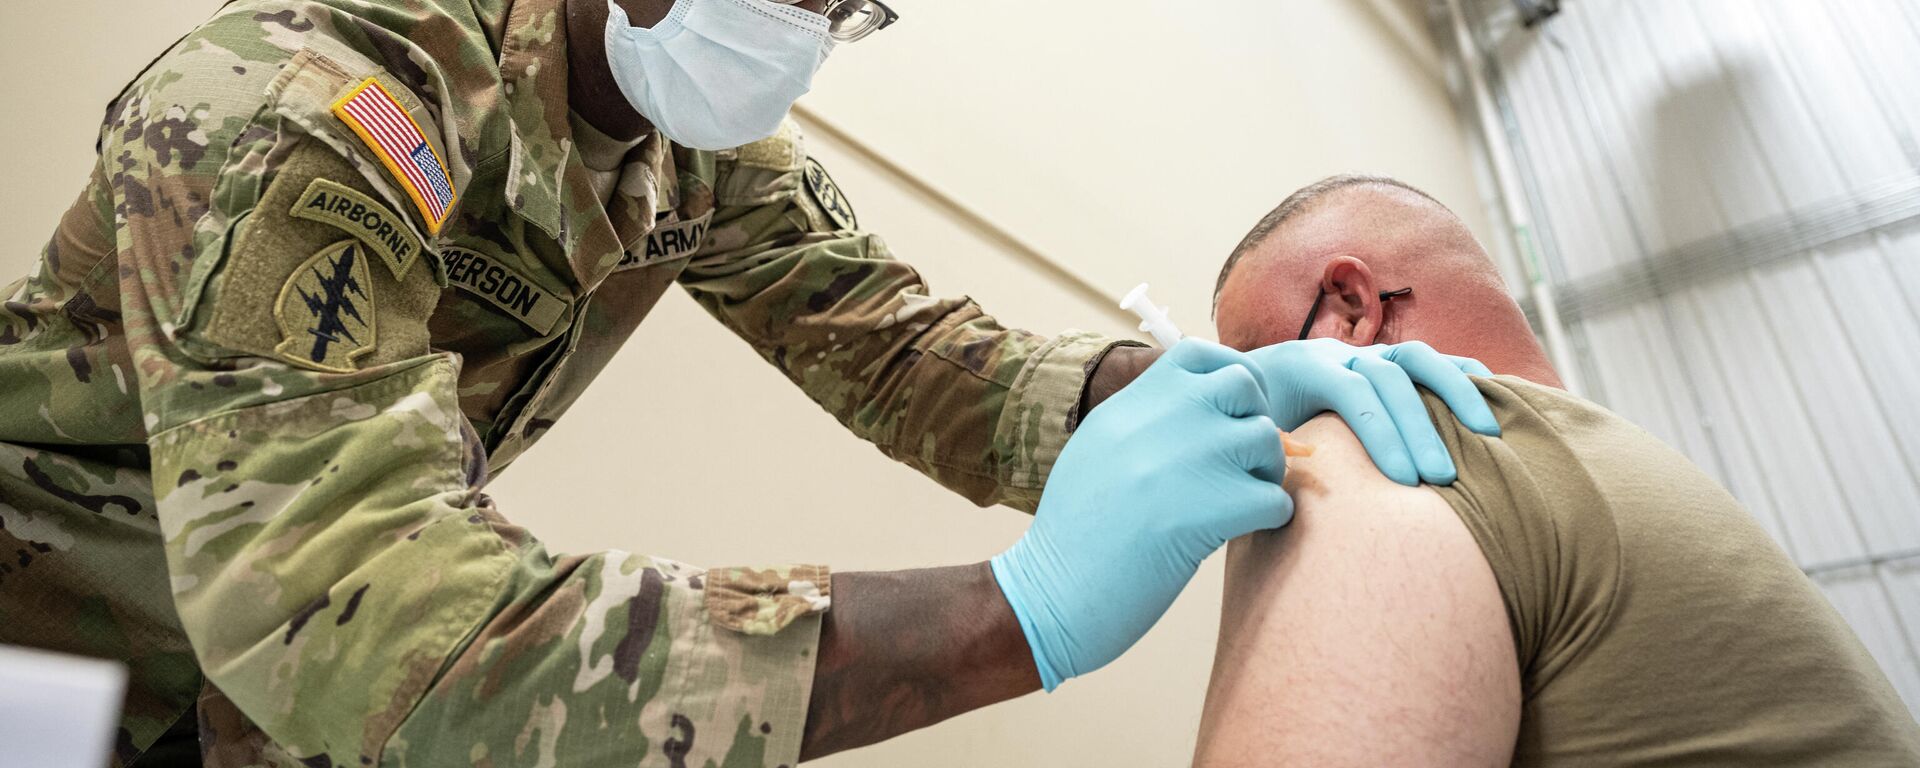 Preventative Medicine Services NCOIC Sergeant First Class Demetrius Roberson administers a COVID-19 vaccine to a soldier on September 9, 2021 in Fort Knox, Kentucky. The Pentagon, with the support of military leaders and U.S. President Joe Biden, mandated COVID-19 vaccination for all military service members in early September. The Pentagon stresses inoculation from COVID-19 and other diseases to avoid outbreaks from impeding the fighting force of the US Military. - Sputnik International, 1920, 05.11.2021